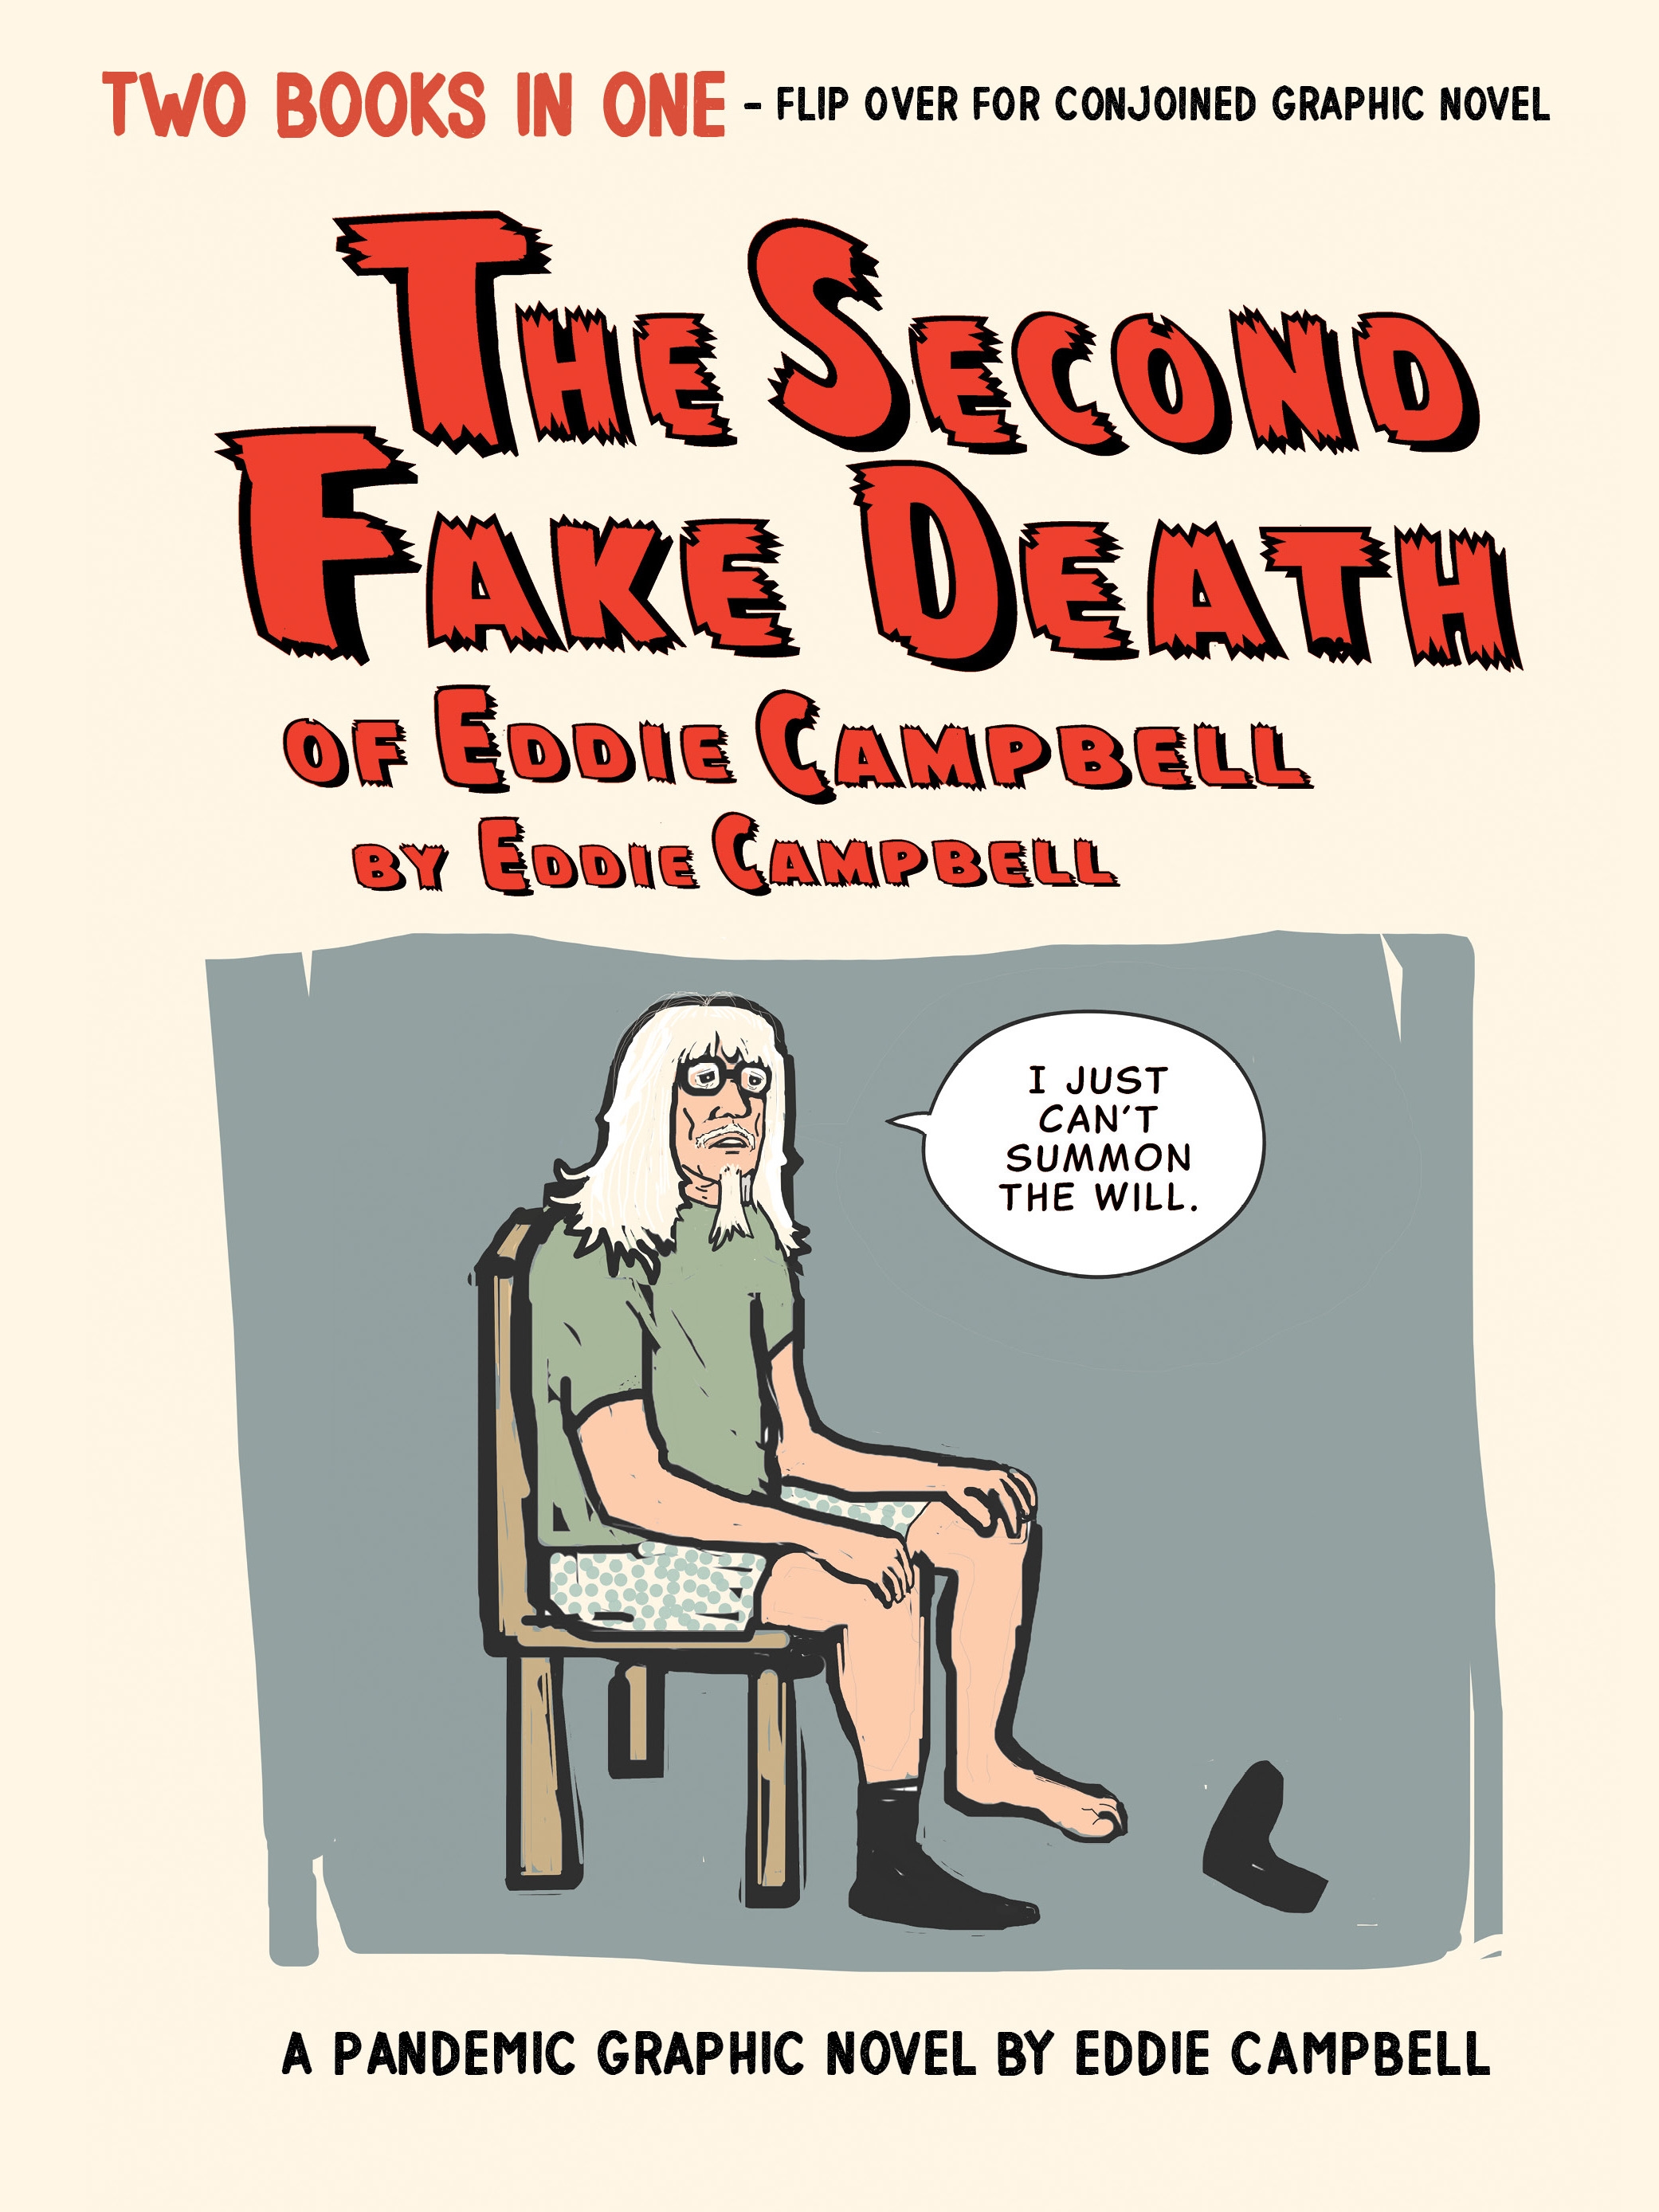 The Second Fake Death of Eddie Campbell & The Fate of the Artist by